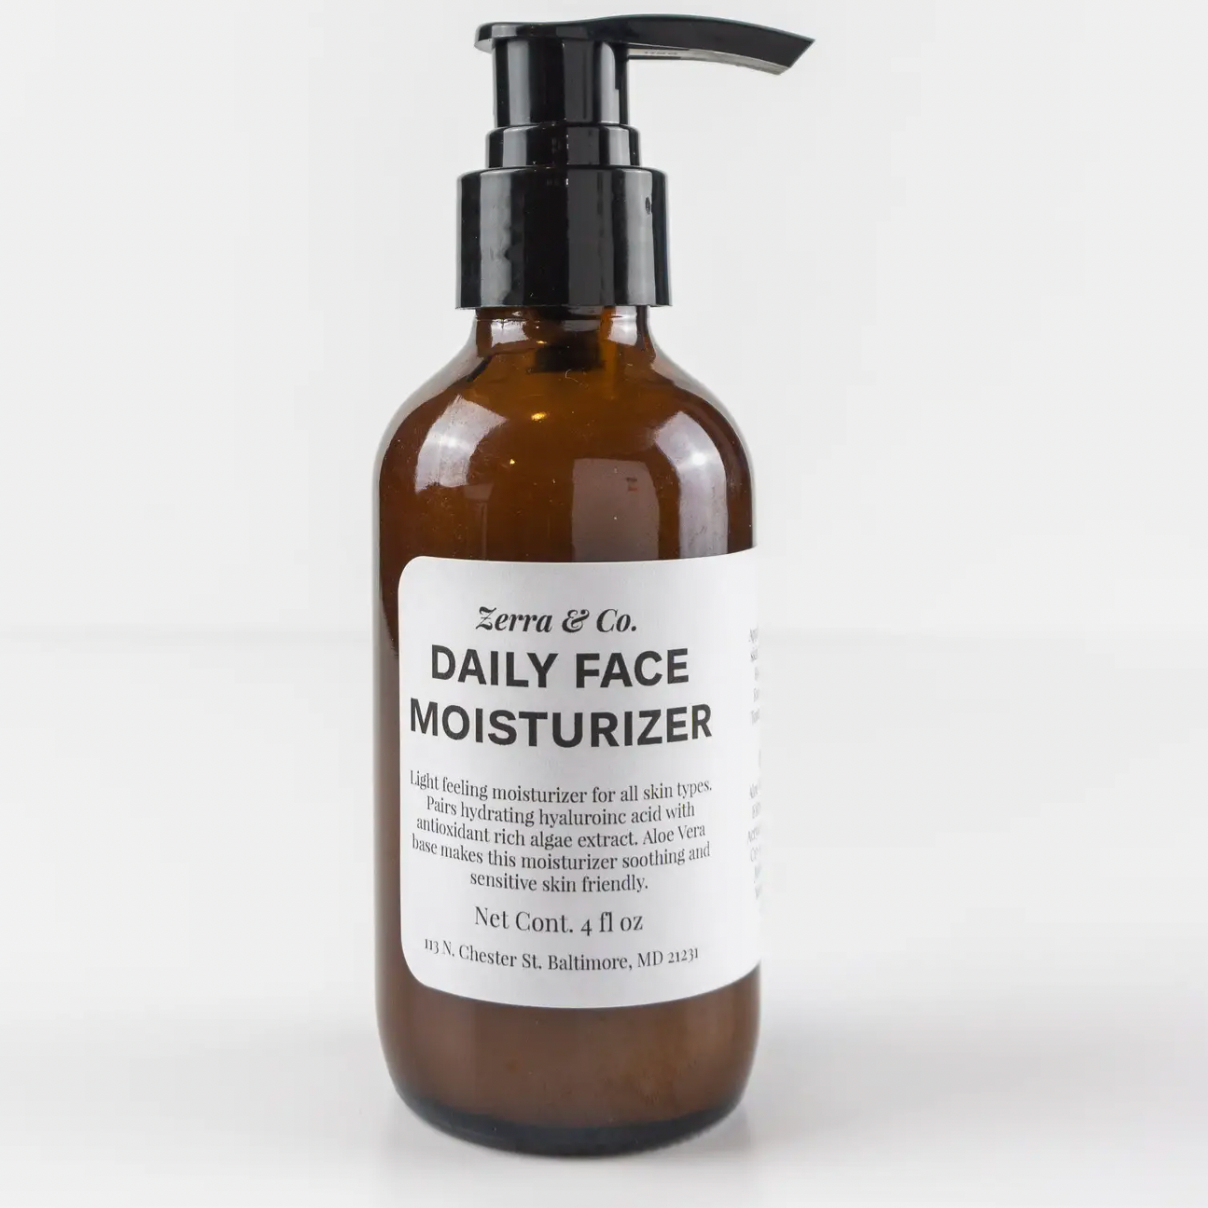 Daily Face Moisturizer- Great for All Skin Types